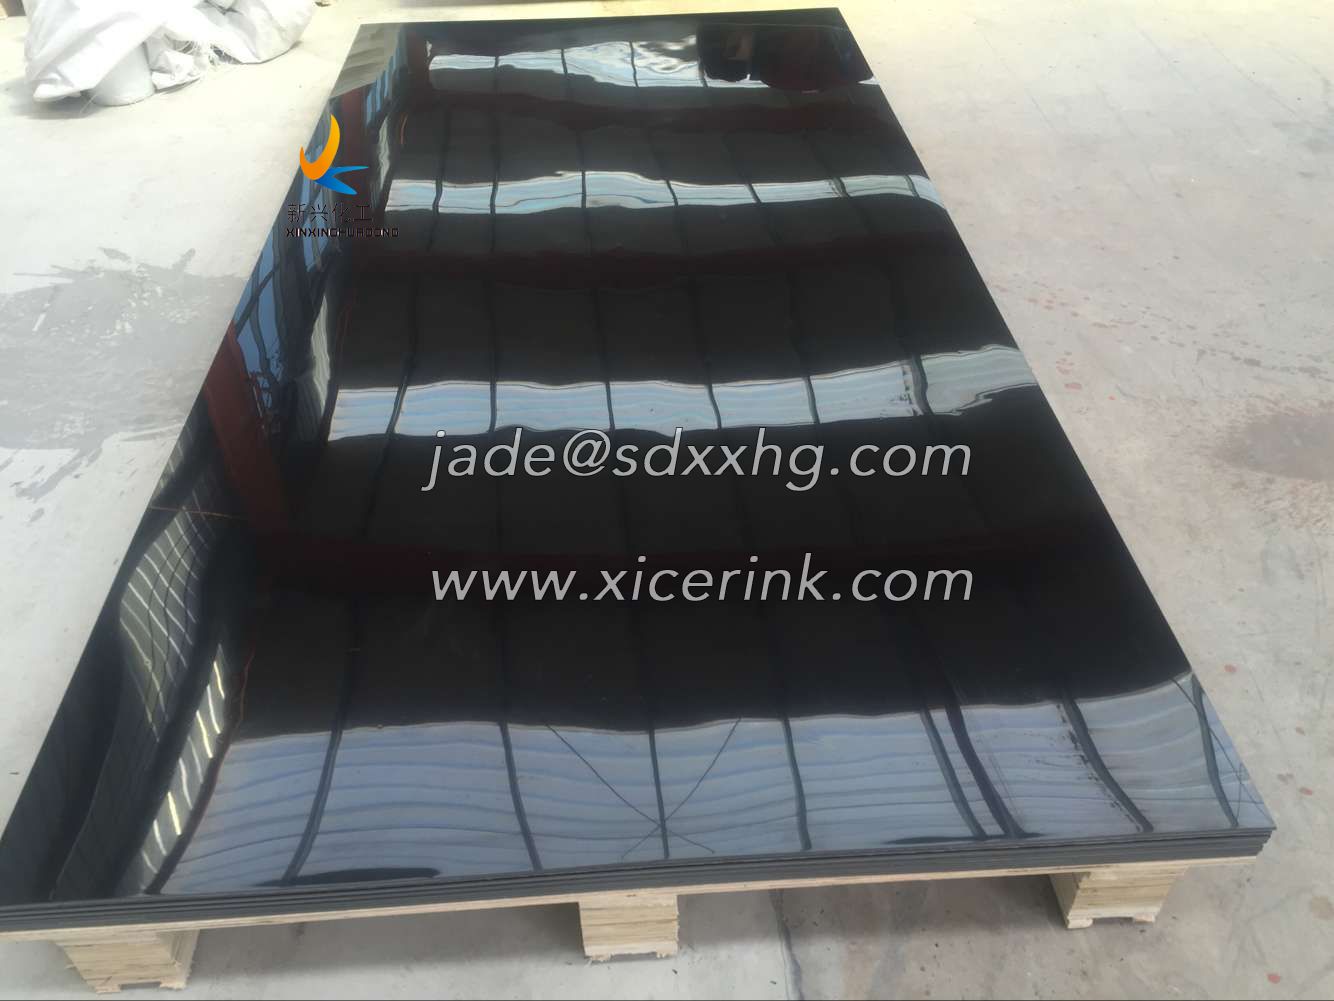 hdpe plastic sheet 1/2 inch recycled plastic sheet hdpe